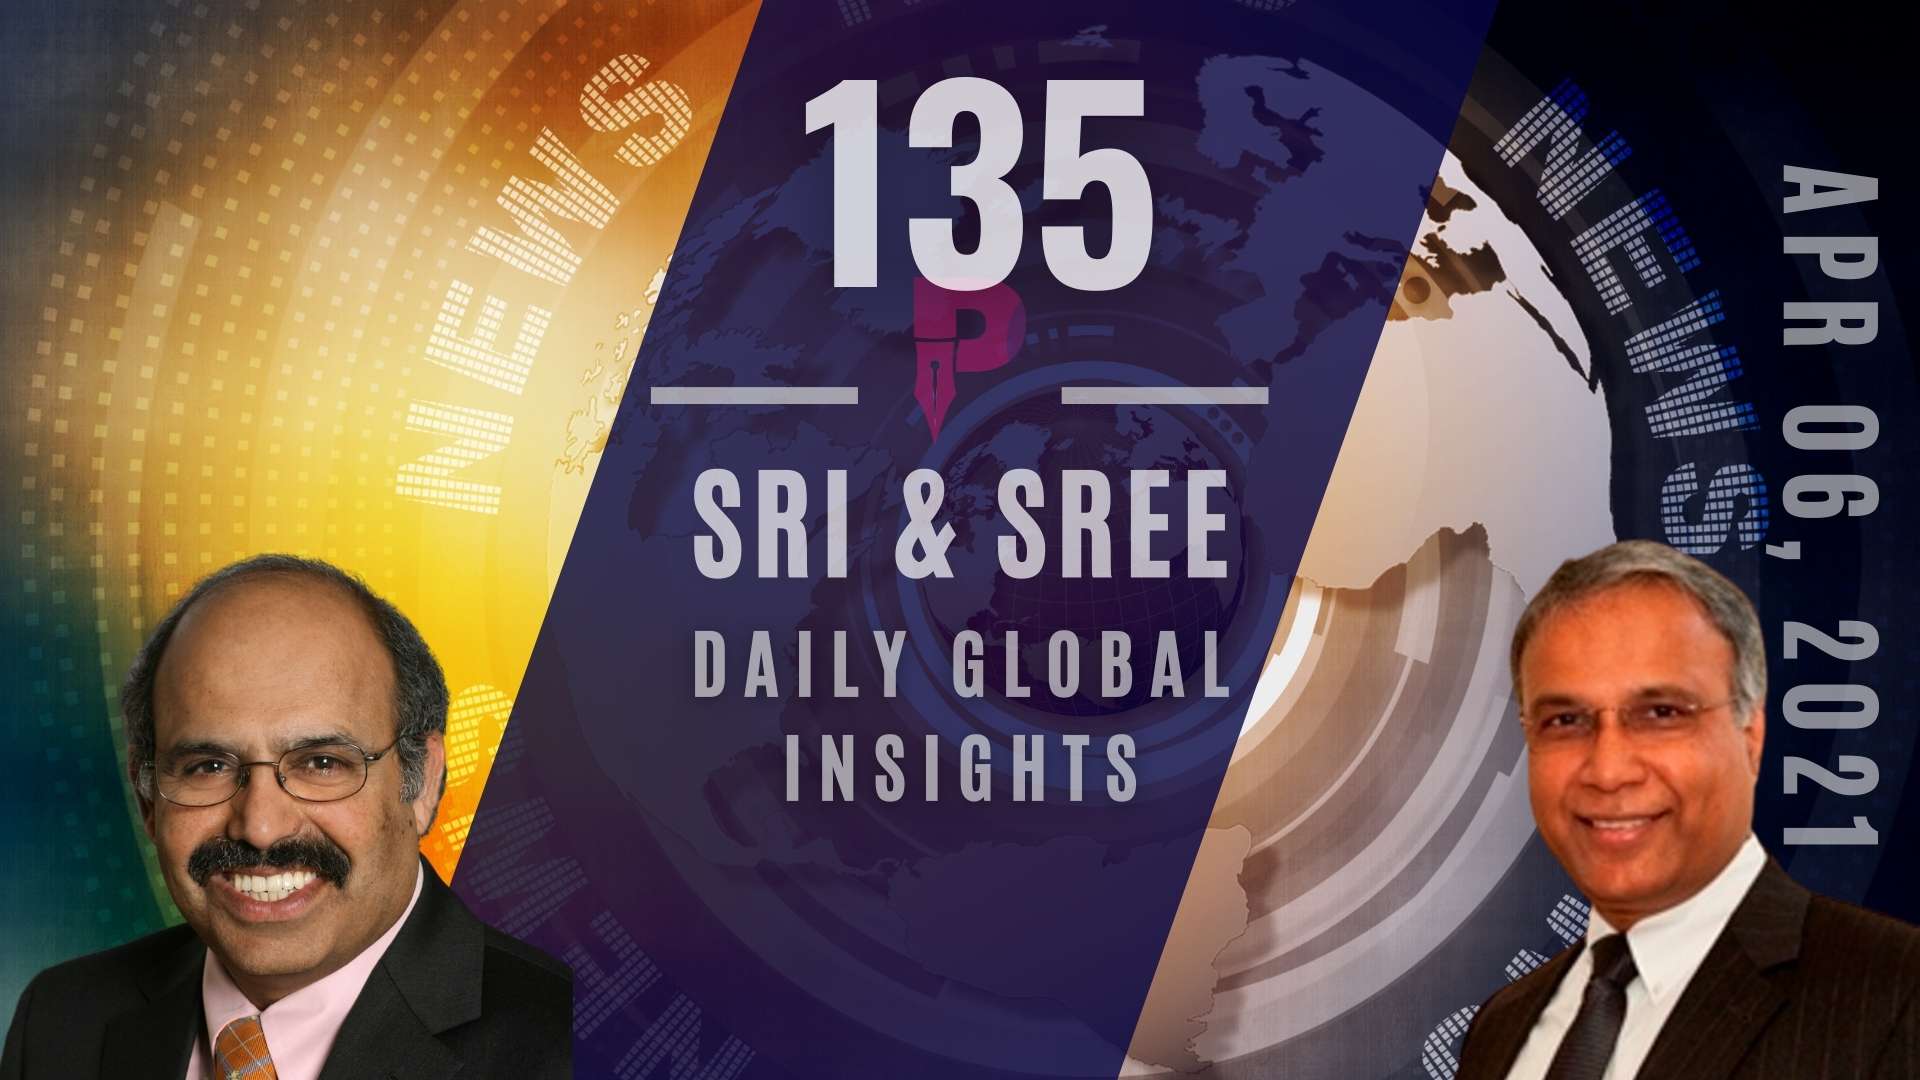 India, Israel, UAE trade could reach $110B by 2030, Yellen wants countries to raise corporate taxes, the Philippines intensifies war of words over the South China Sea, all these and more